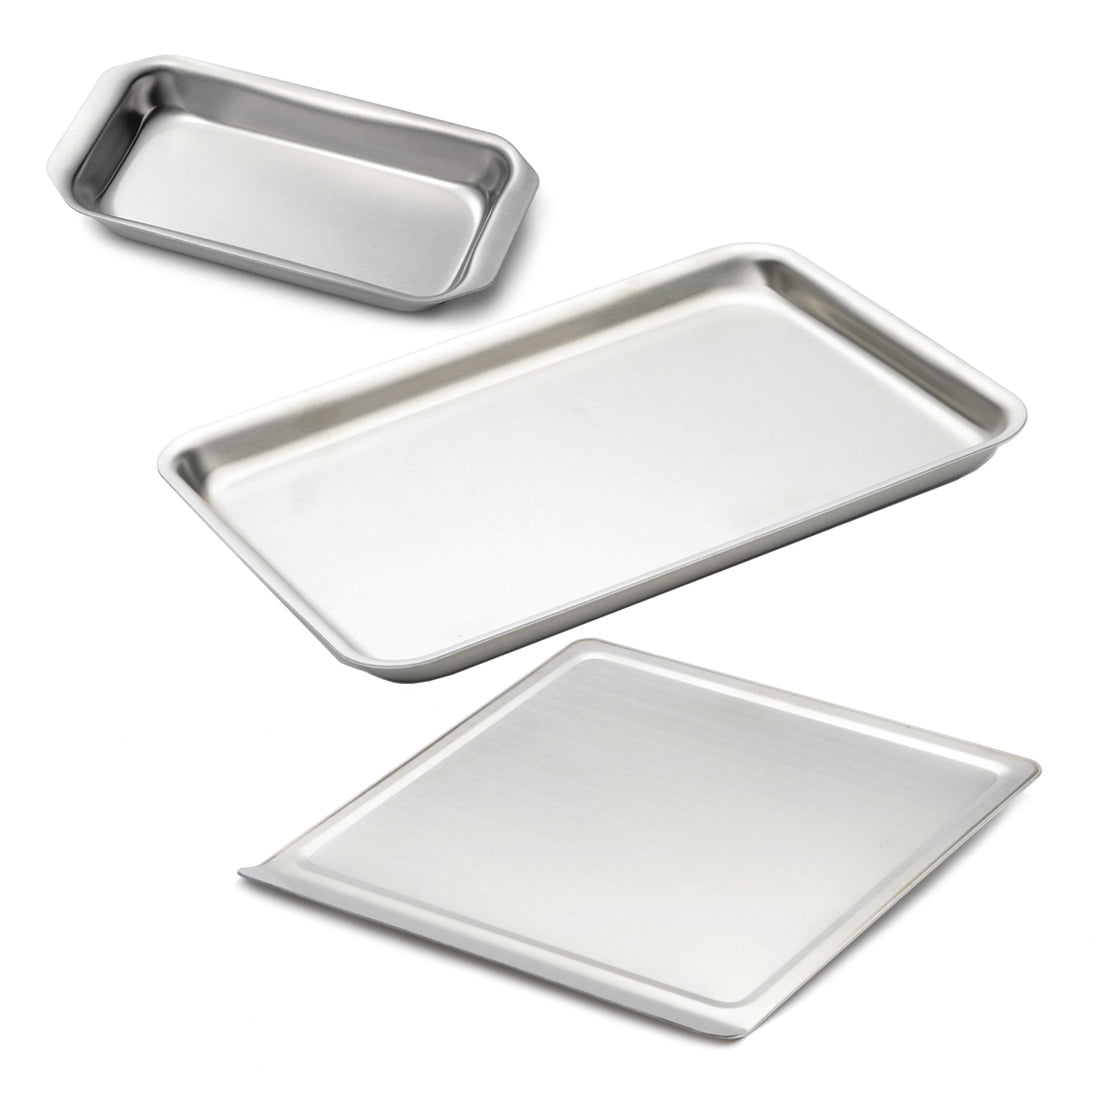 3pcs, Baking Sheets, Stainless Steel Meal Prep Containers, Cookie Sheets  Set, Freezer Food Storage Containers, Baking Tools, Kitchen Gadgets, Kitchen